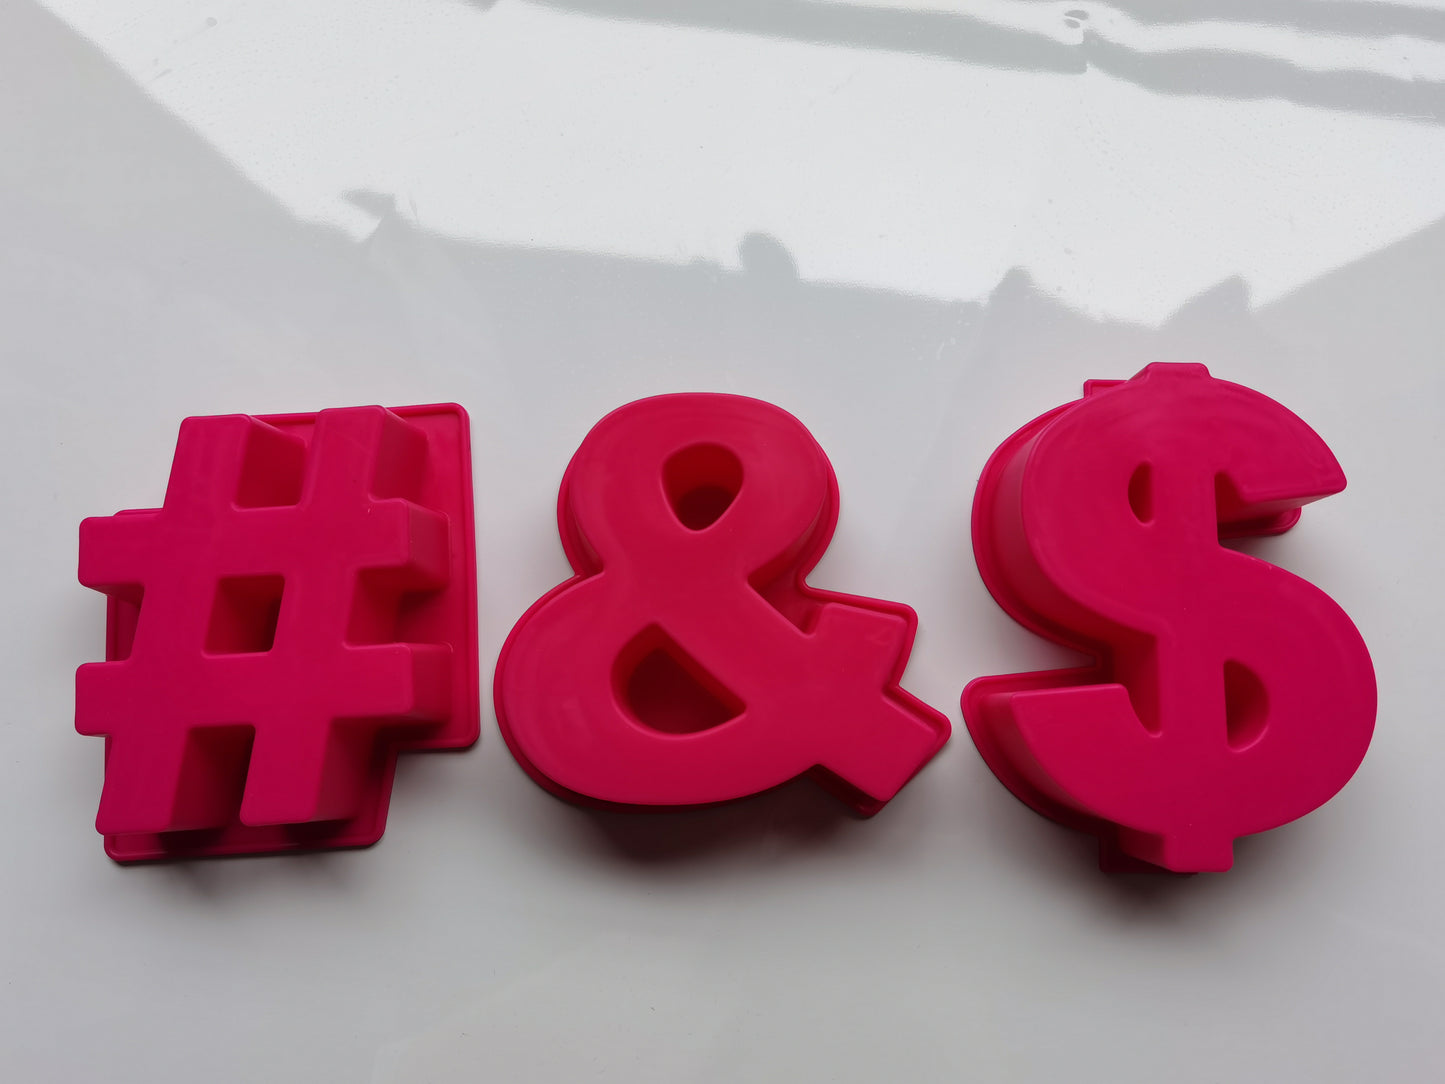 VI *40 Day Delivery from China Saver* MoldyfunUSA Giant Pink Letters set of 26 Resin Mold